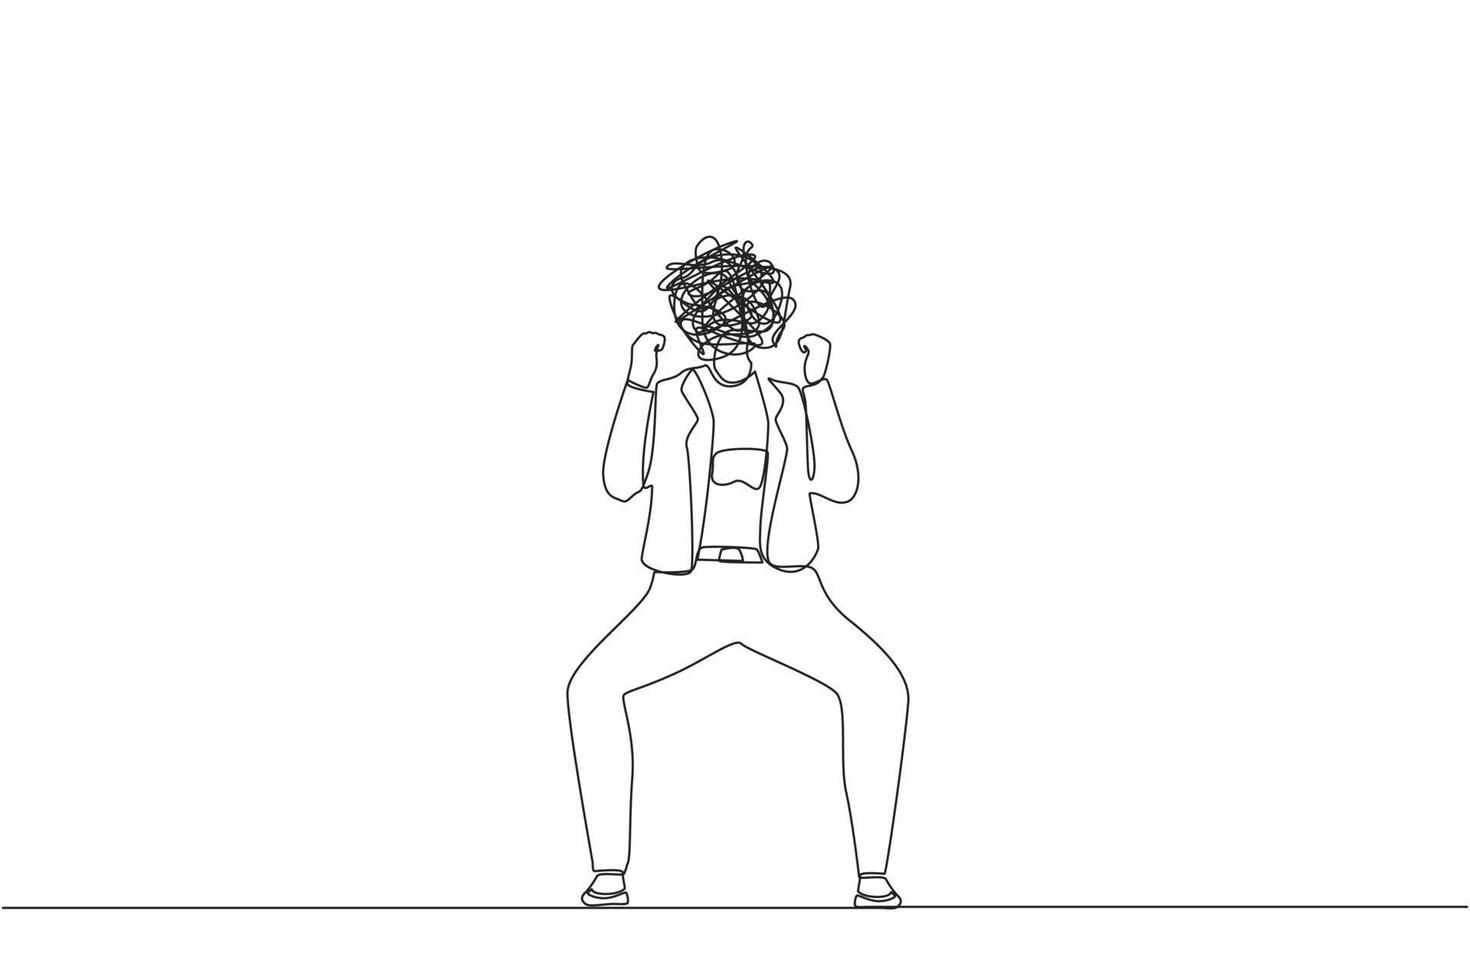 Single one line drawing businesswoman with round scribbles instead of head. Angry woman raised fist gesture. Expresses negative emotions, feelings, desperately. Continuous line design graphic vector